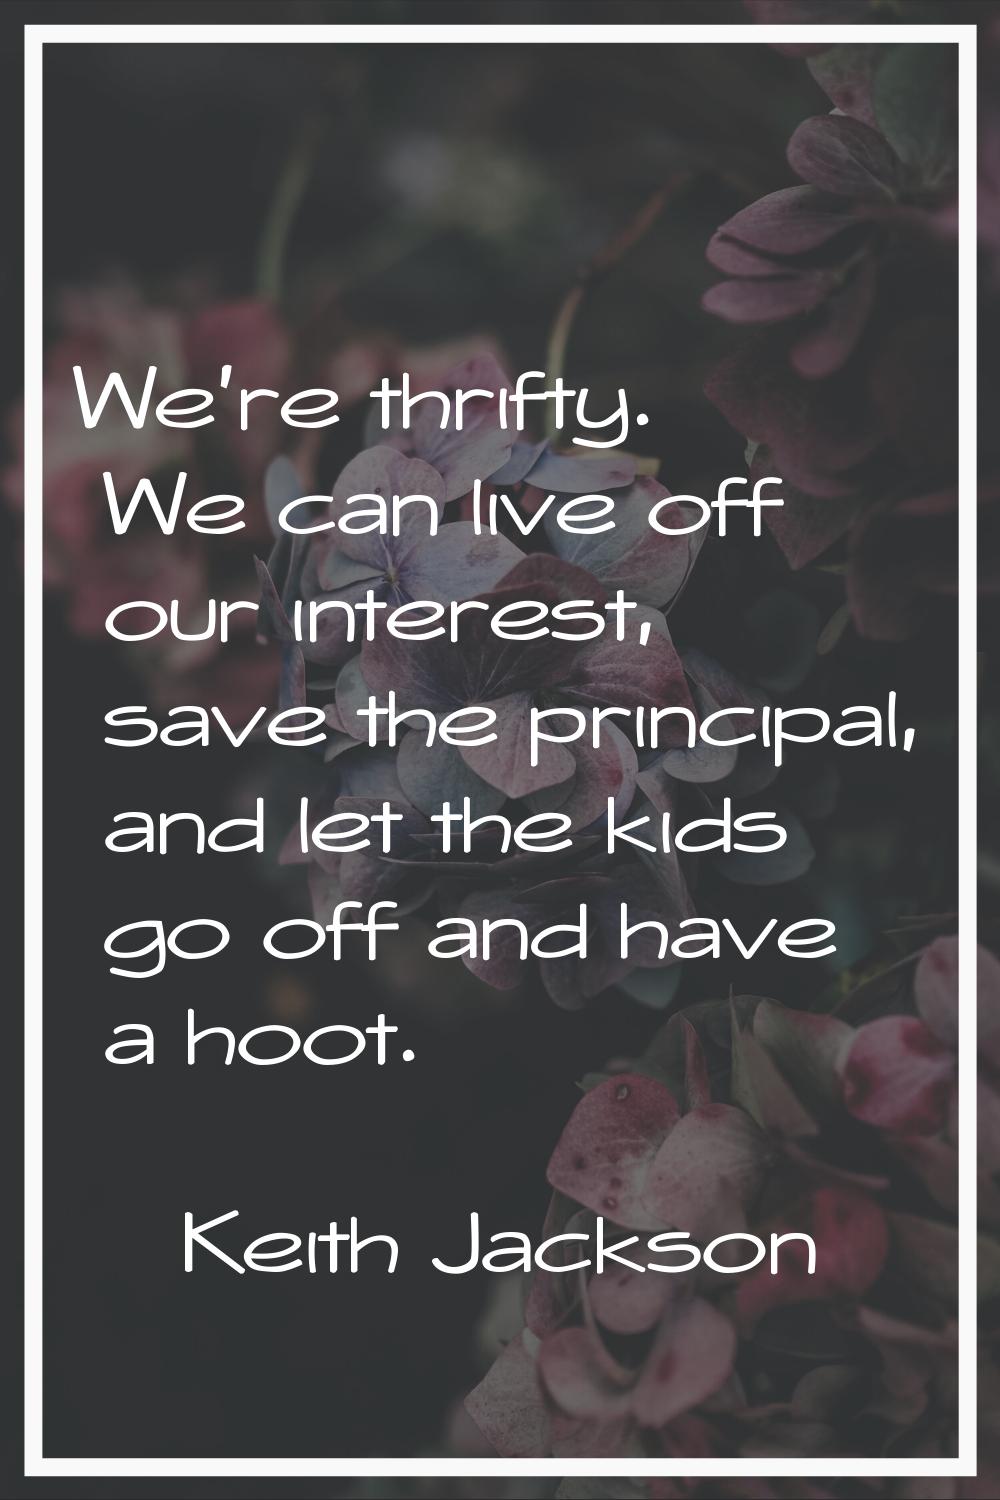 We're thrifty. We can live off our interest, save the principal, and let the kids go off and have a